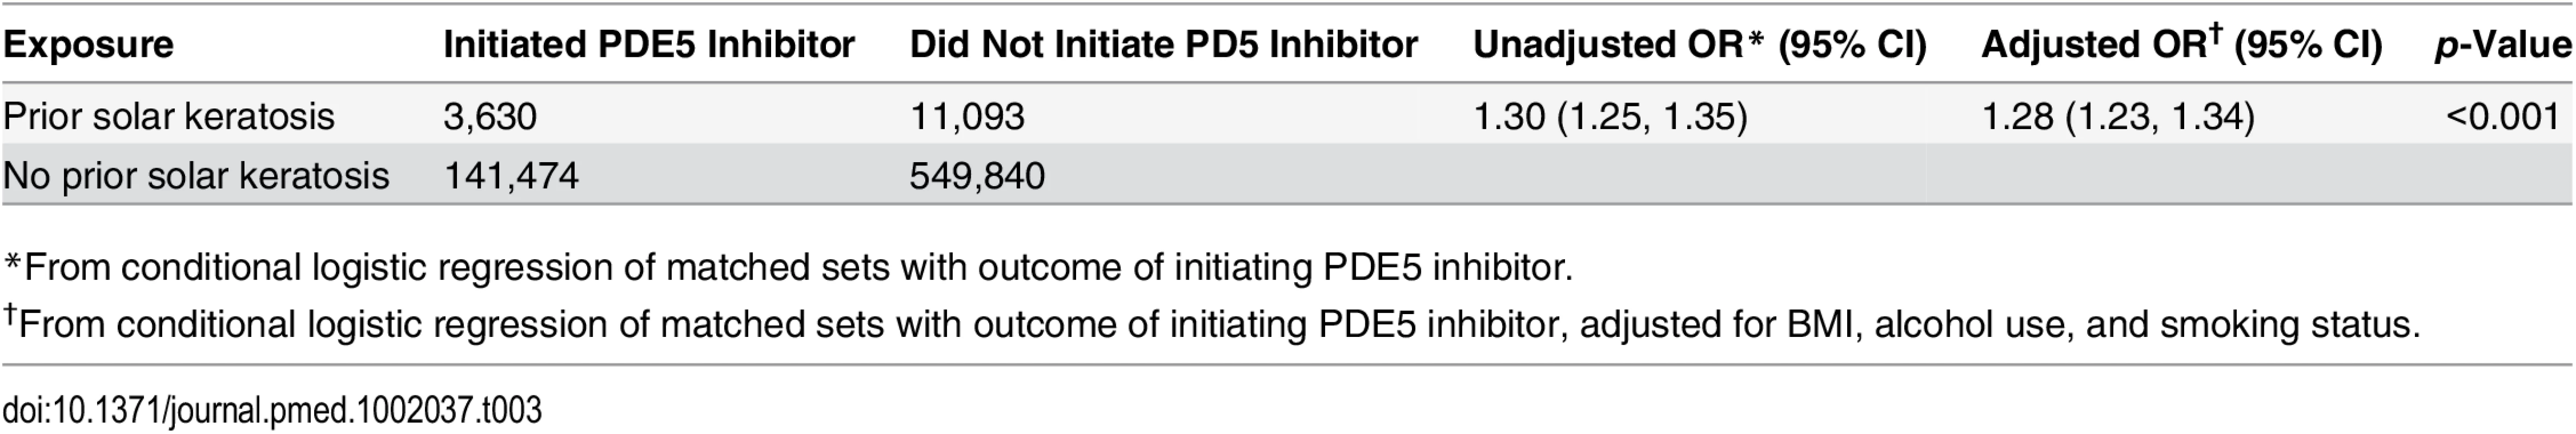 Post hoc analysis of association between prior solar keratosis and initiation of a PDE5 inhibitor.